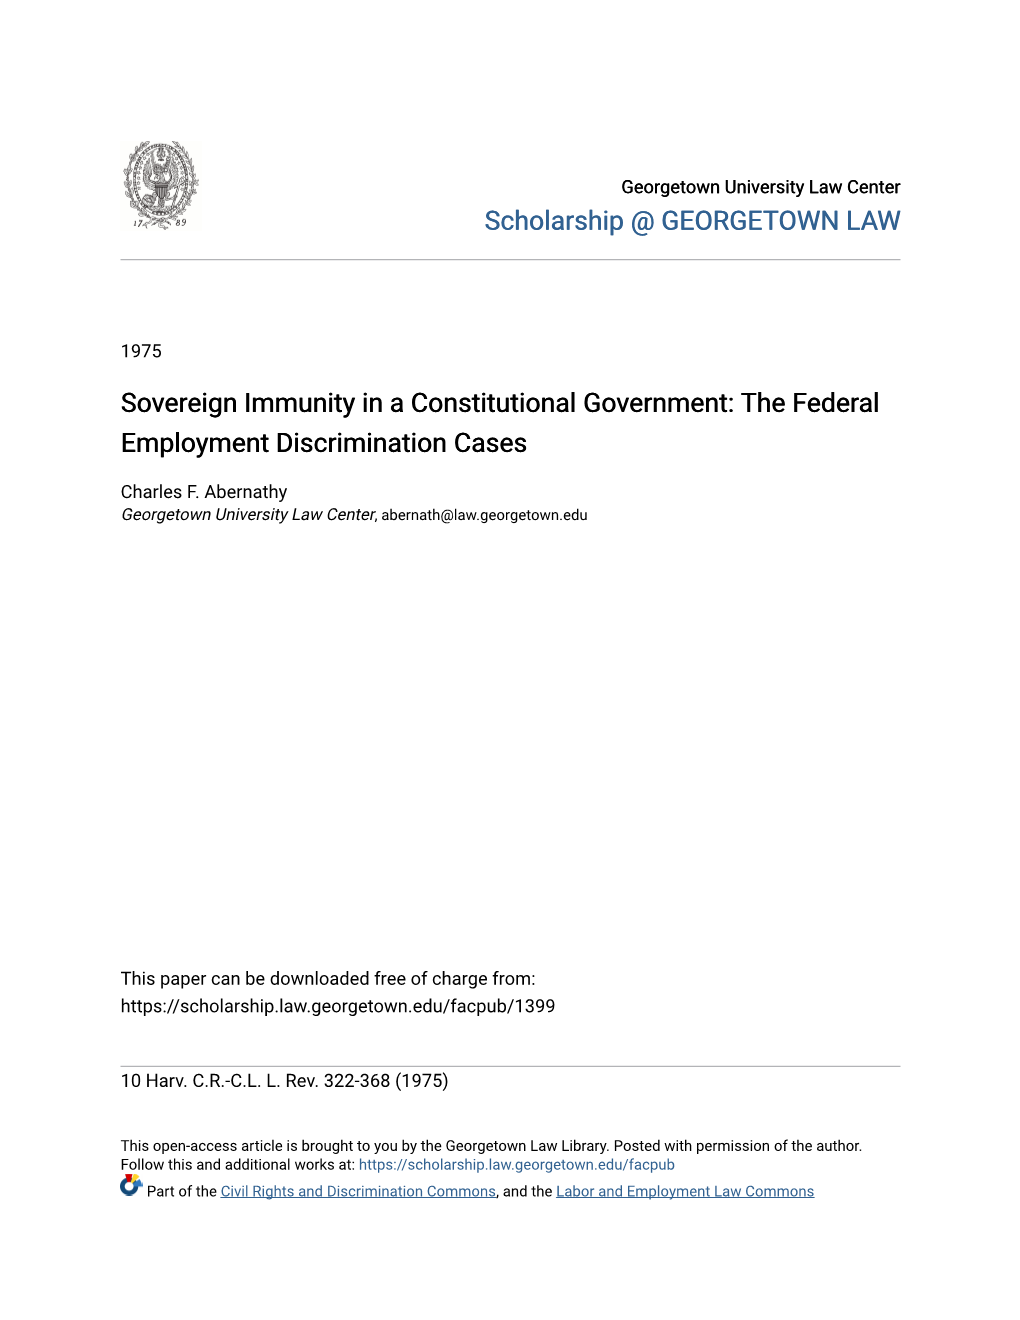 Sovereign Immunity in a Constitutional Government: the Federal Employment Discrimination Cases